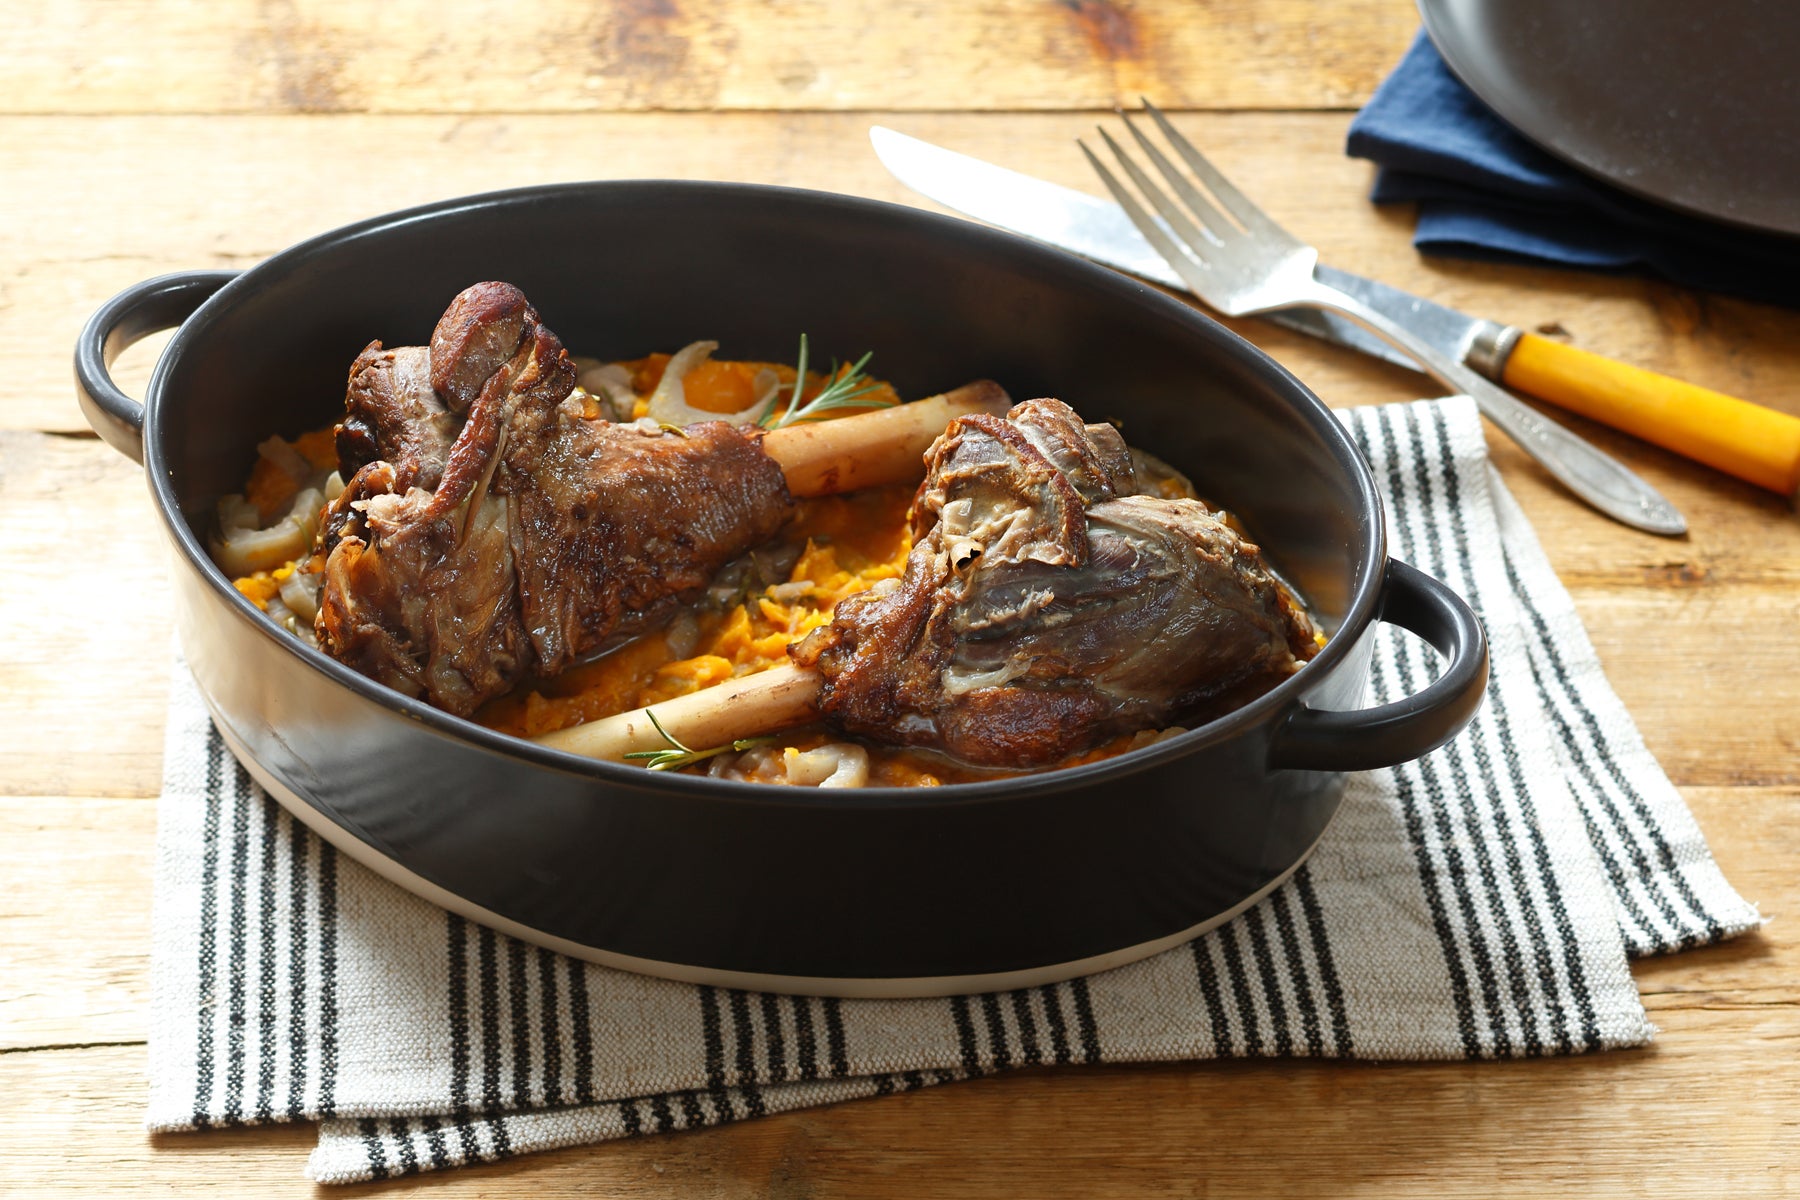 “The Country Cat’s” Red Wine-Braised Lamb Shank